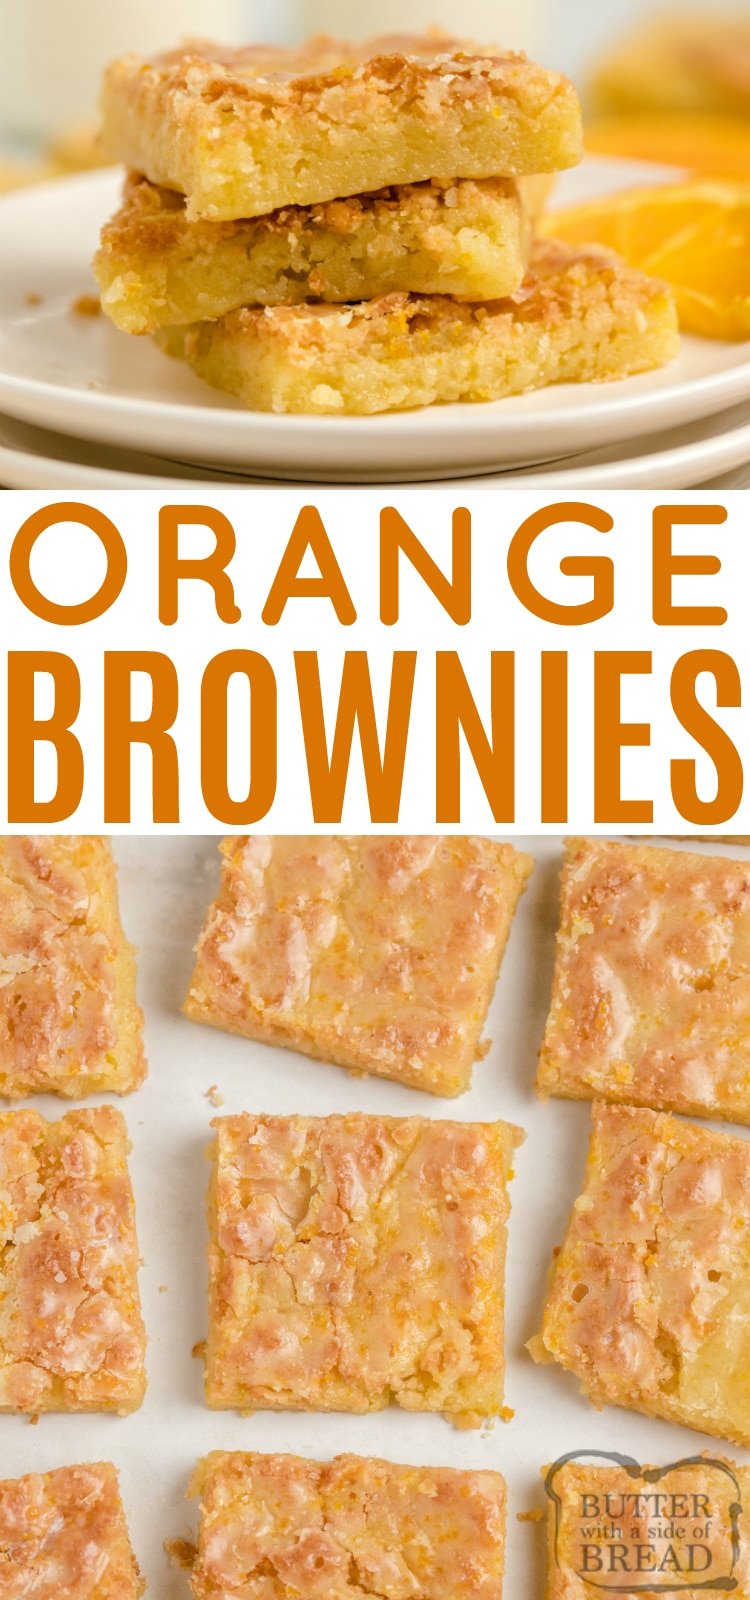 Glazed Orange Brownies are full of orange flavor in a soft and chewy dessert bar recipe. These orange brownies are even more delicious with a simple orange glaze on top! 